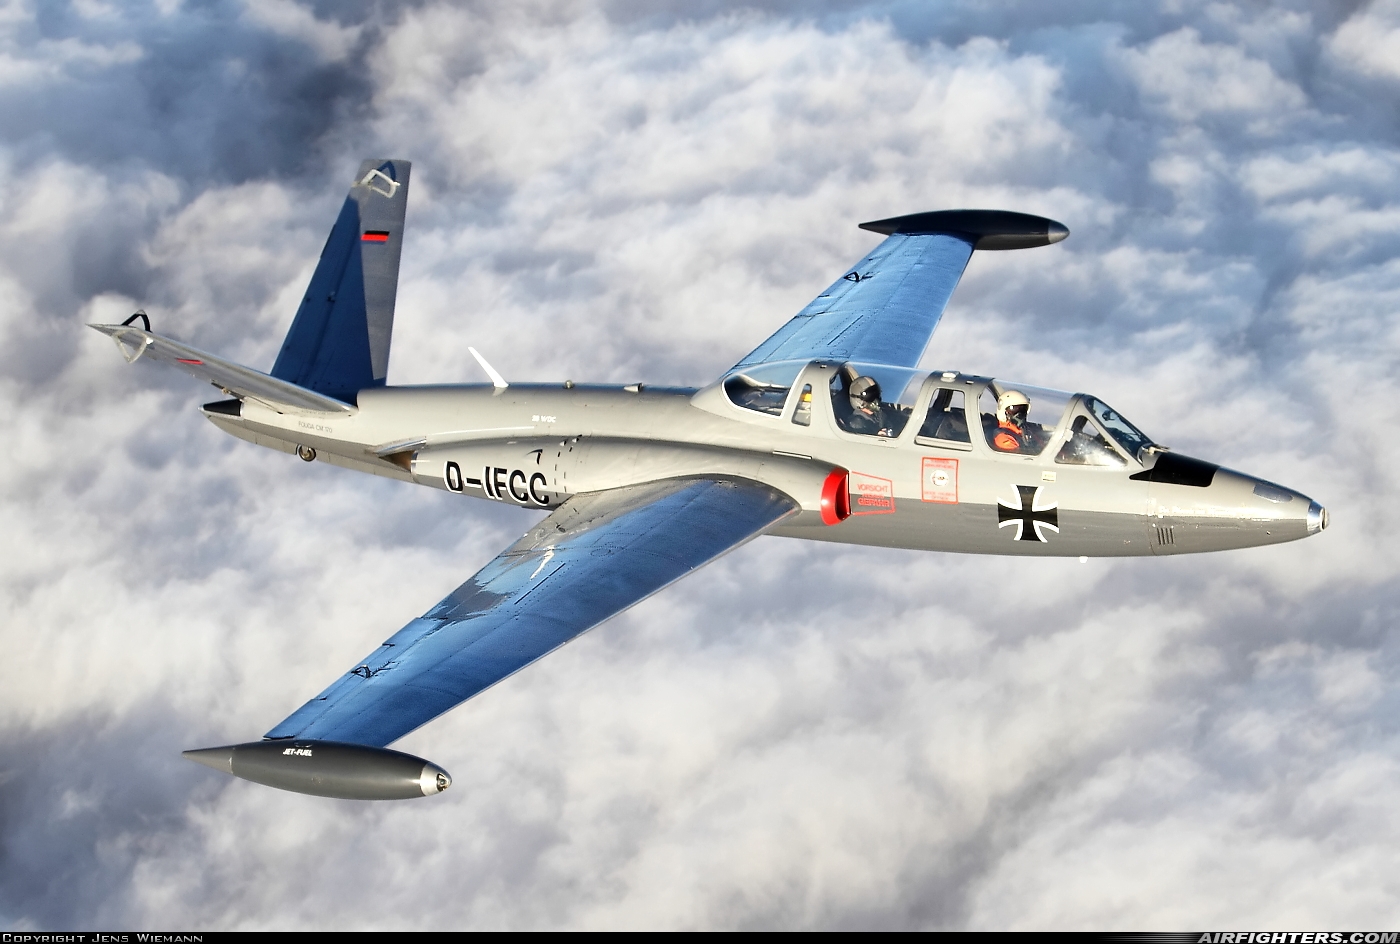 Private - Flugwerk GmbH Fouga CM-170 Magister D-IFCC at In Flight, Germany